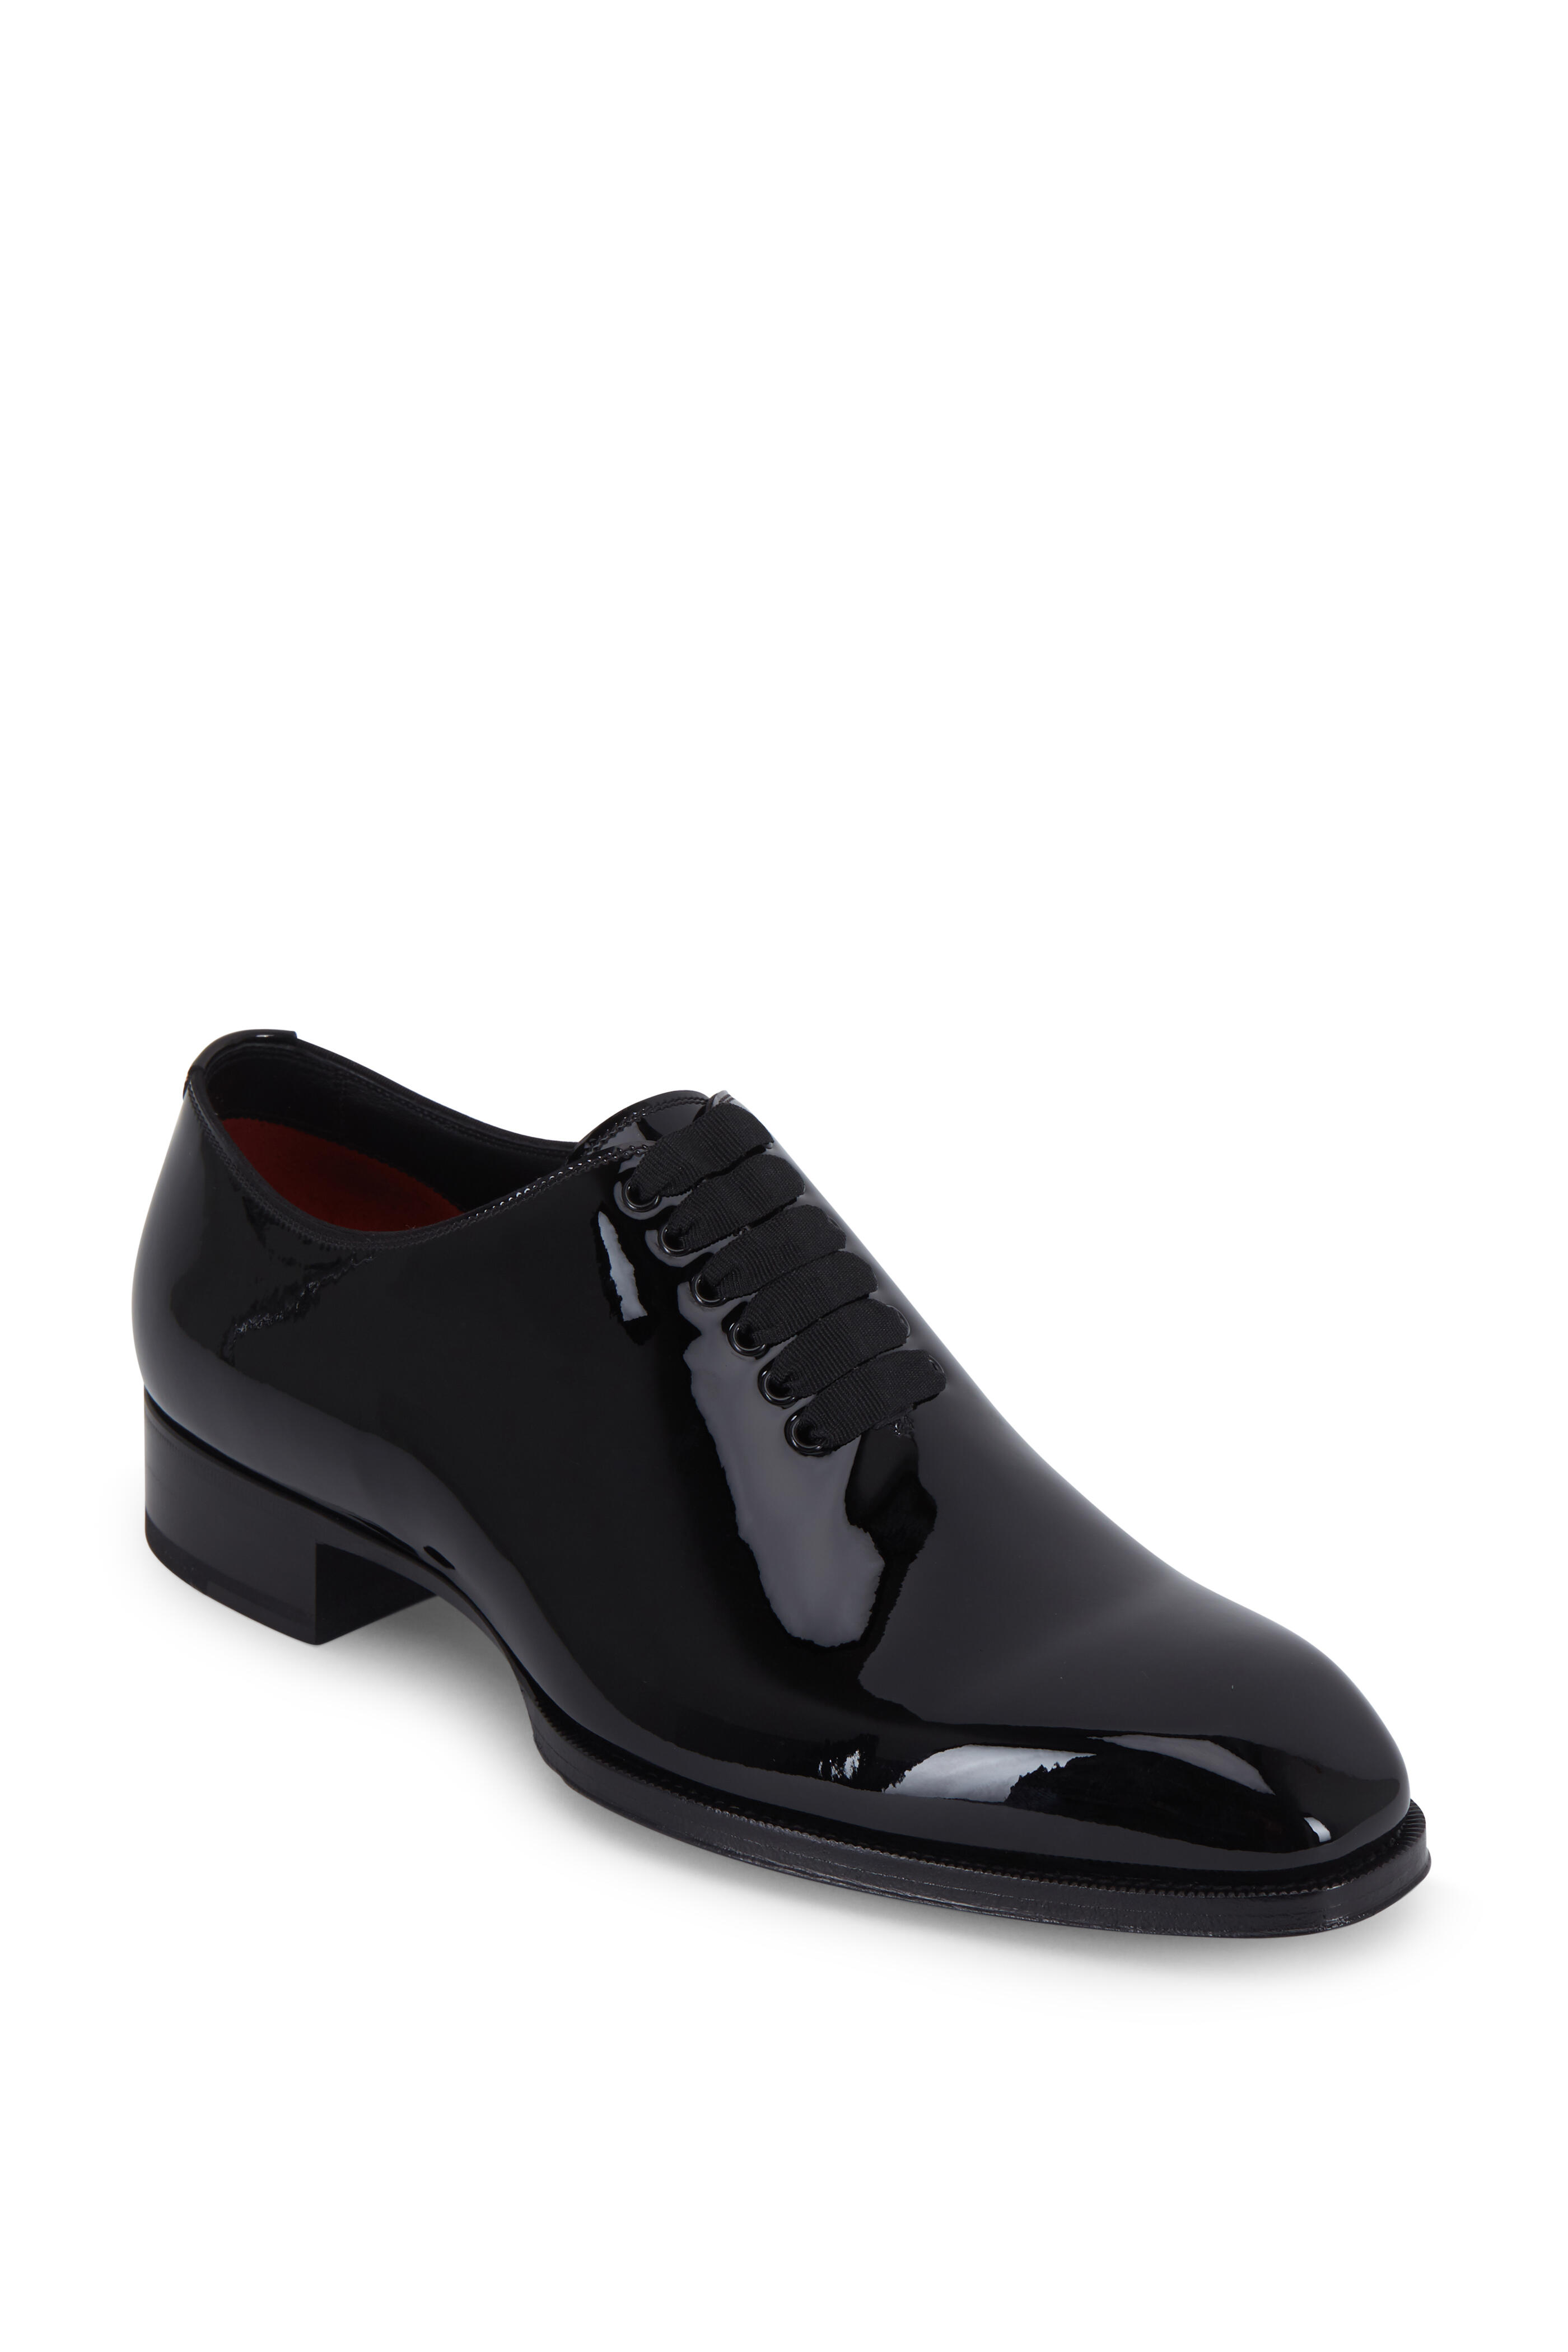 Black Patent Leather Oxford Wholecut Formal Evening, US 13 Leather